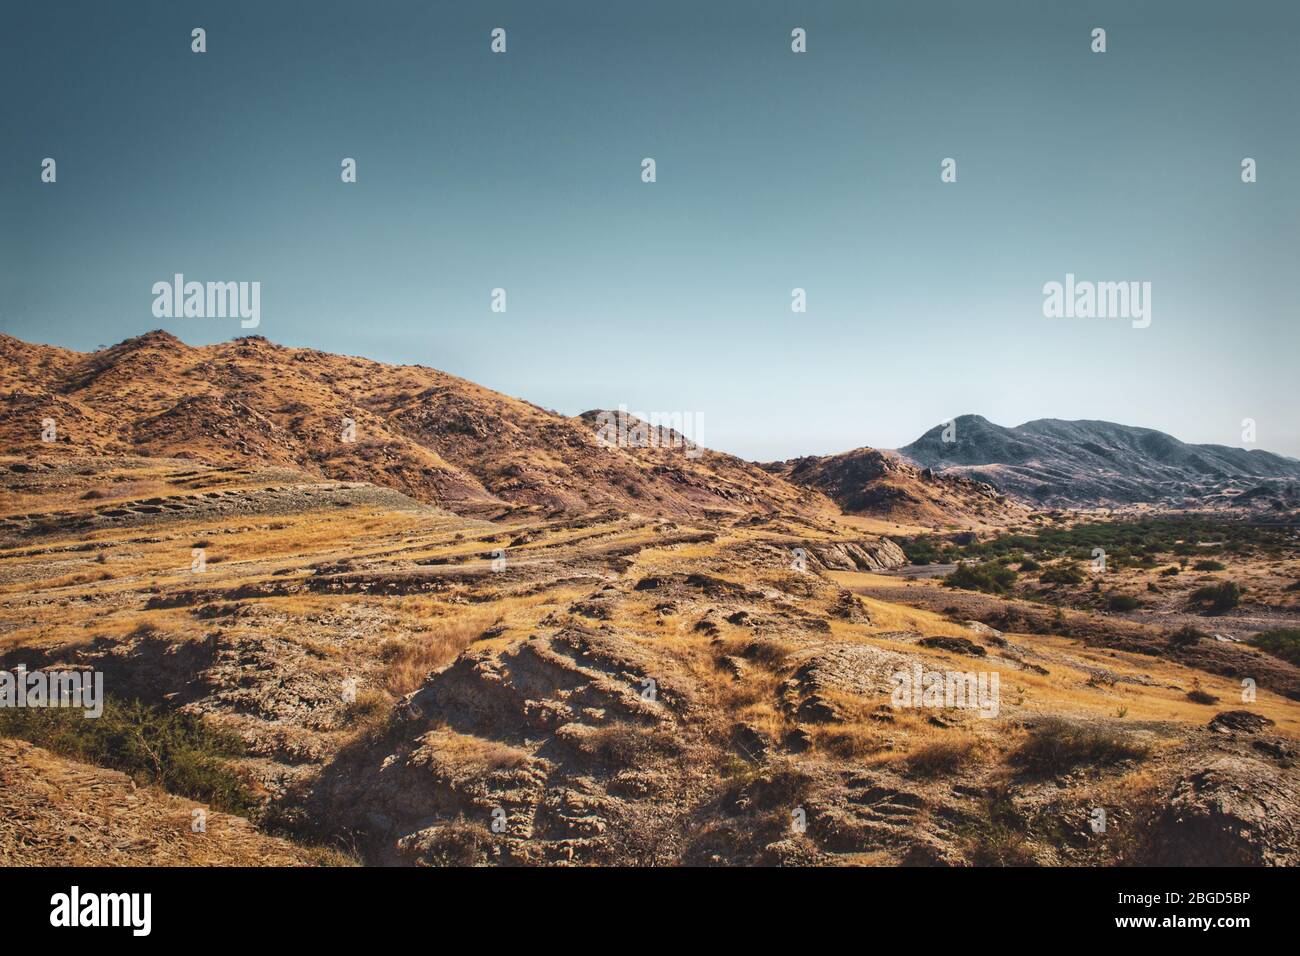 The mountains landscape photography Stock Photo